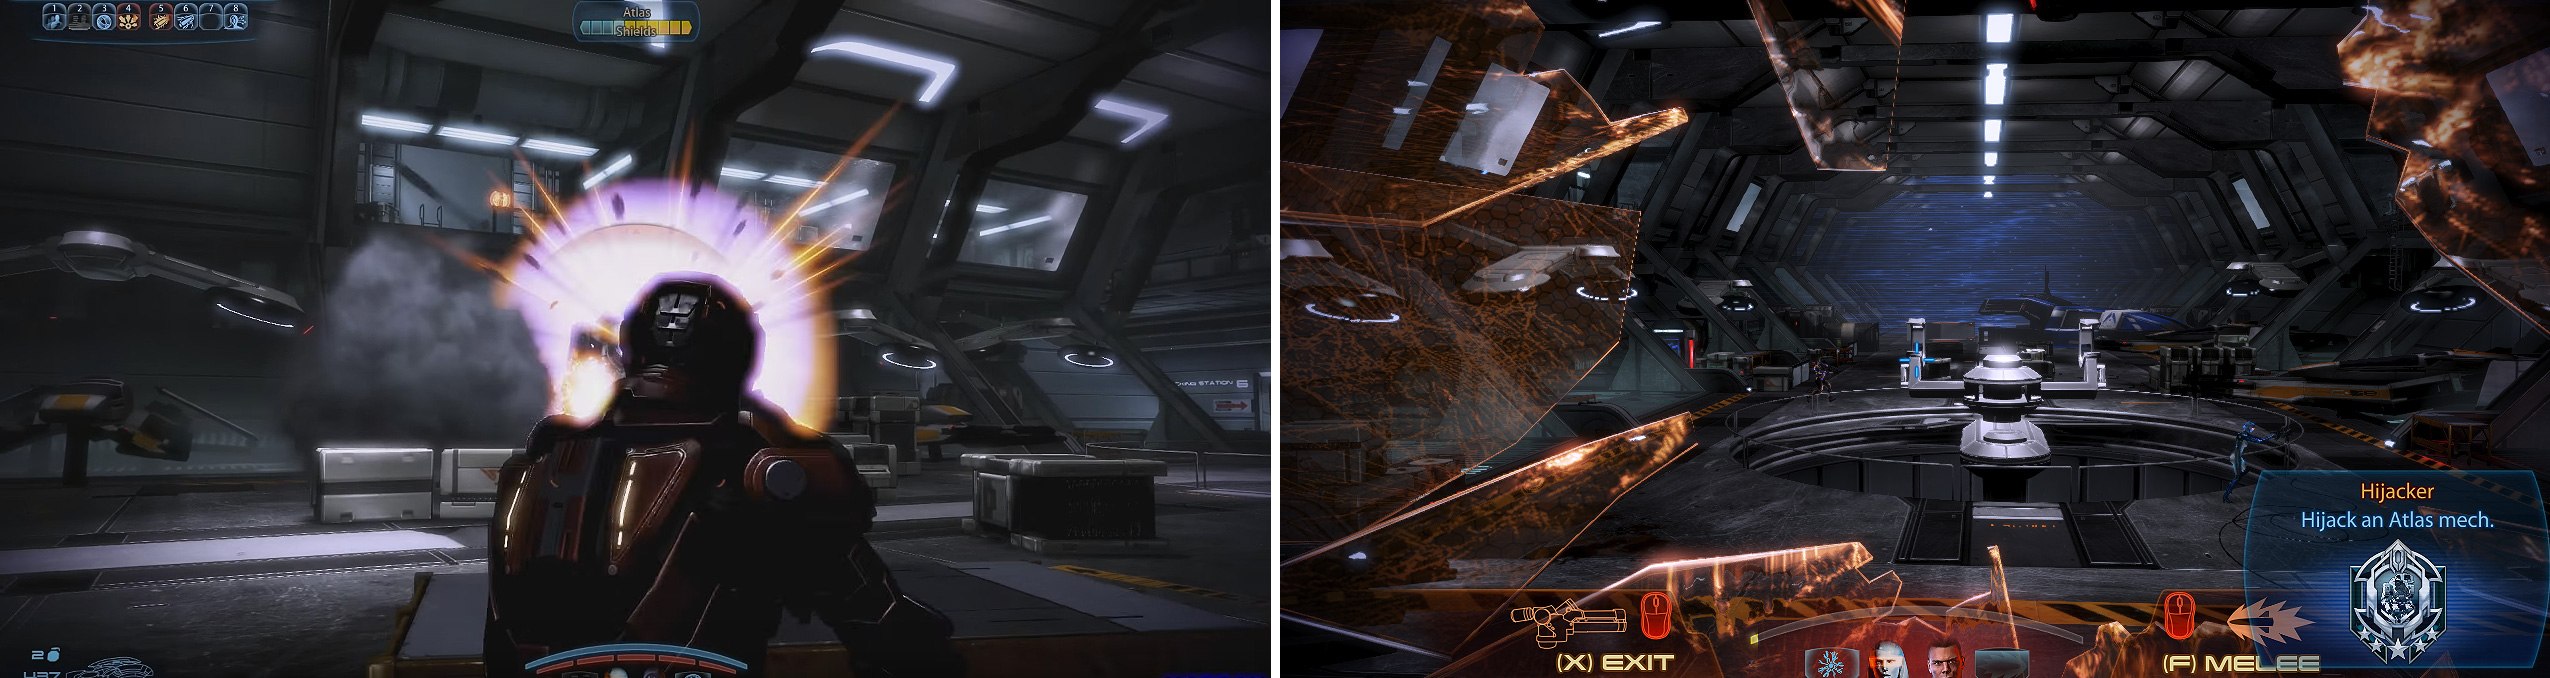 Beware the Atlas here (left). Unleash Grenades to whittle down their armor. Look for the third Atlas and try to kill the pilot before he gets inside. Hijack it for mass destruction (right).